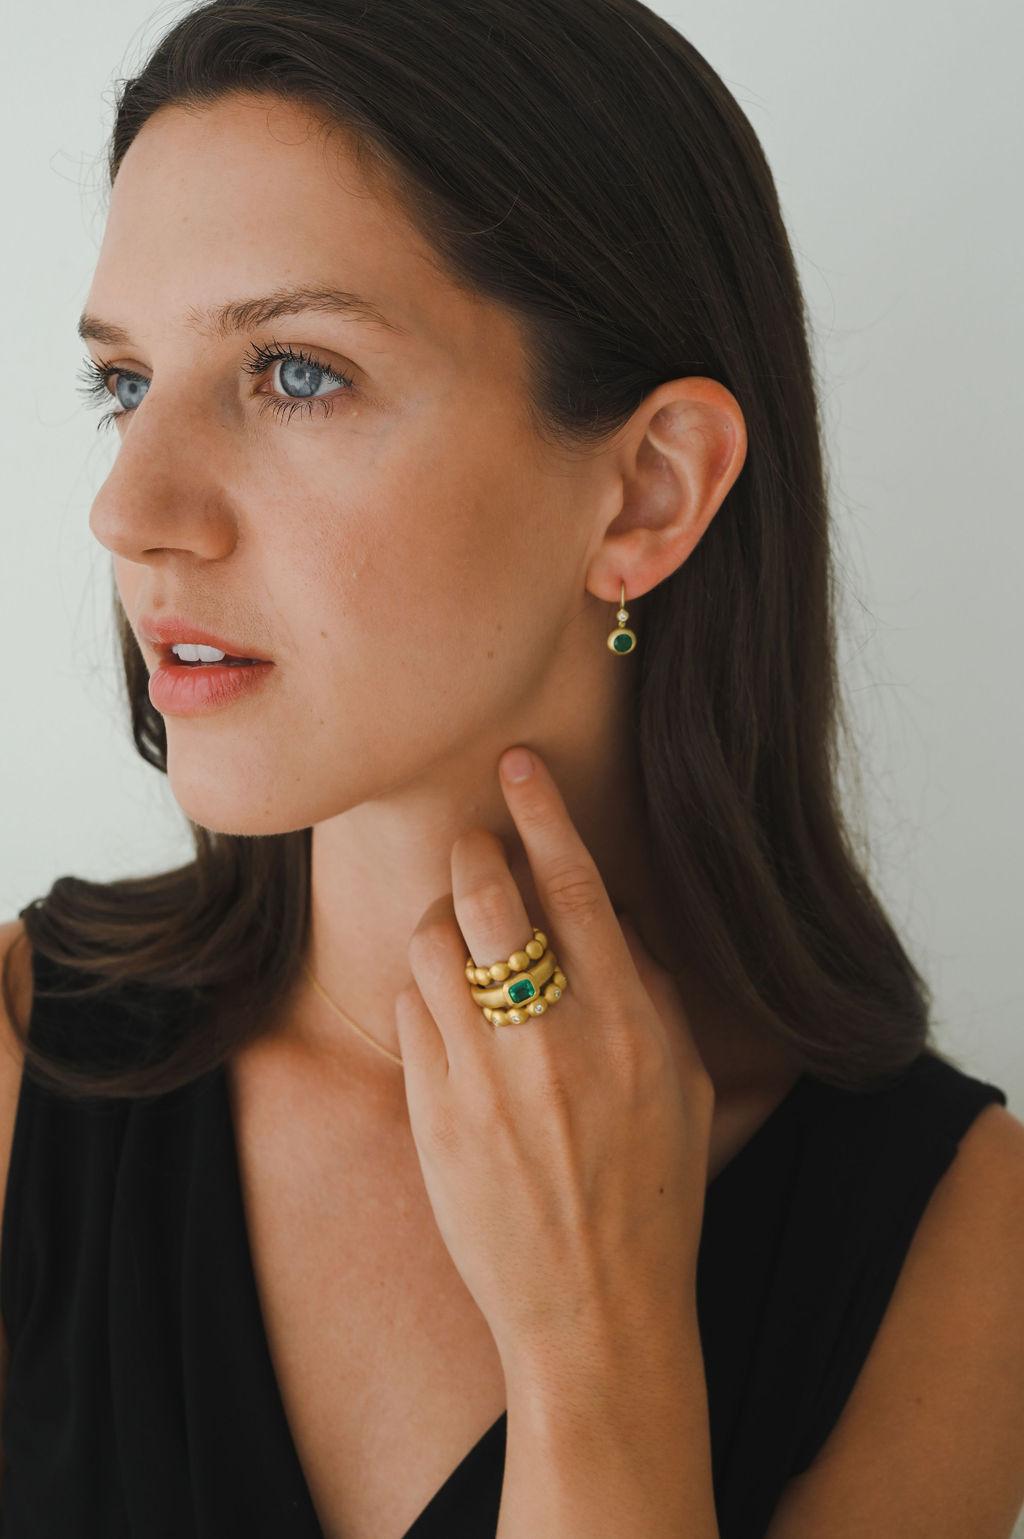 Faye Kim's 18 Karat Gold Emerald and Diamond Domed Earrings with Granulation Hinge feature emeralds set in a classic matte finished dome bezel and paired with complementary bezel set diamonds. The hinge detail adds movement while the bezel settings